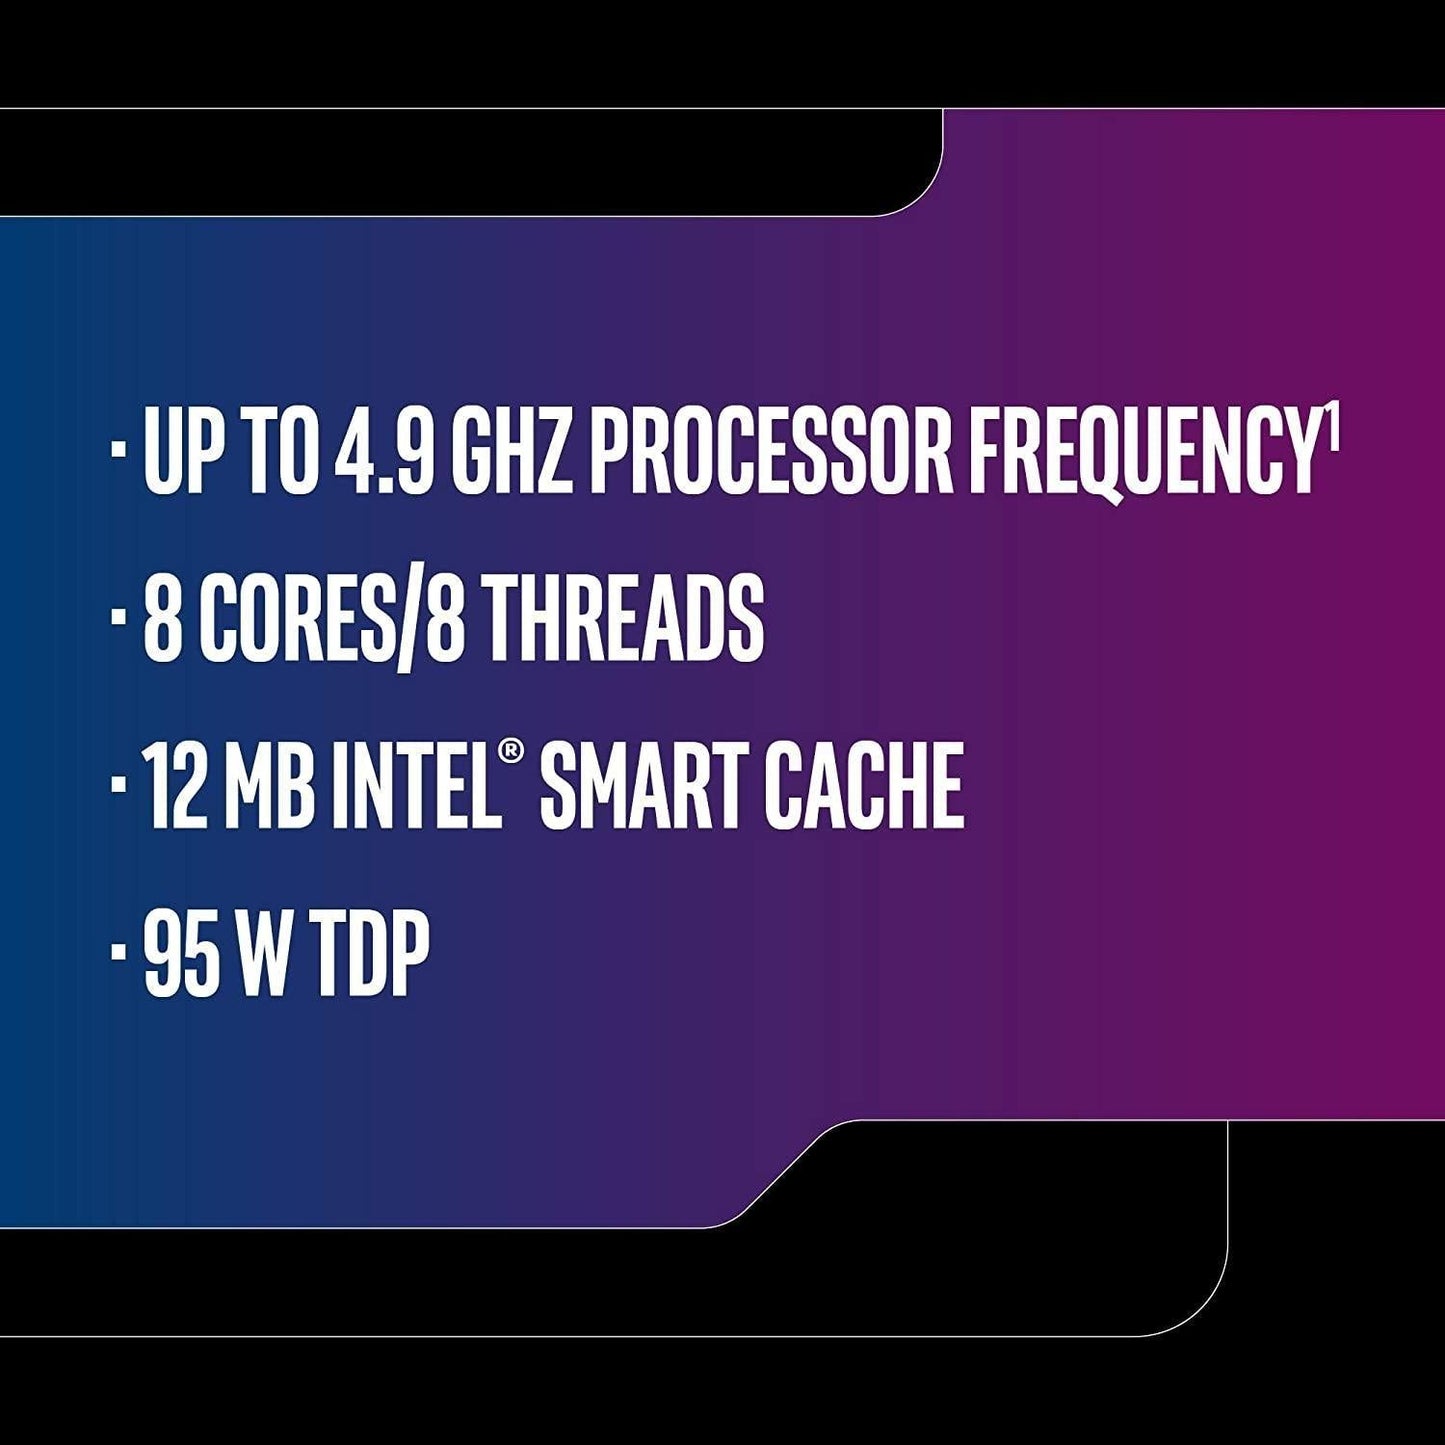 Intel ® Core i7-9700K Processor (12M Cache, up to 4.90 GHz) - Store For Gamers